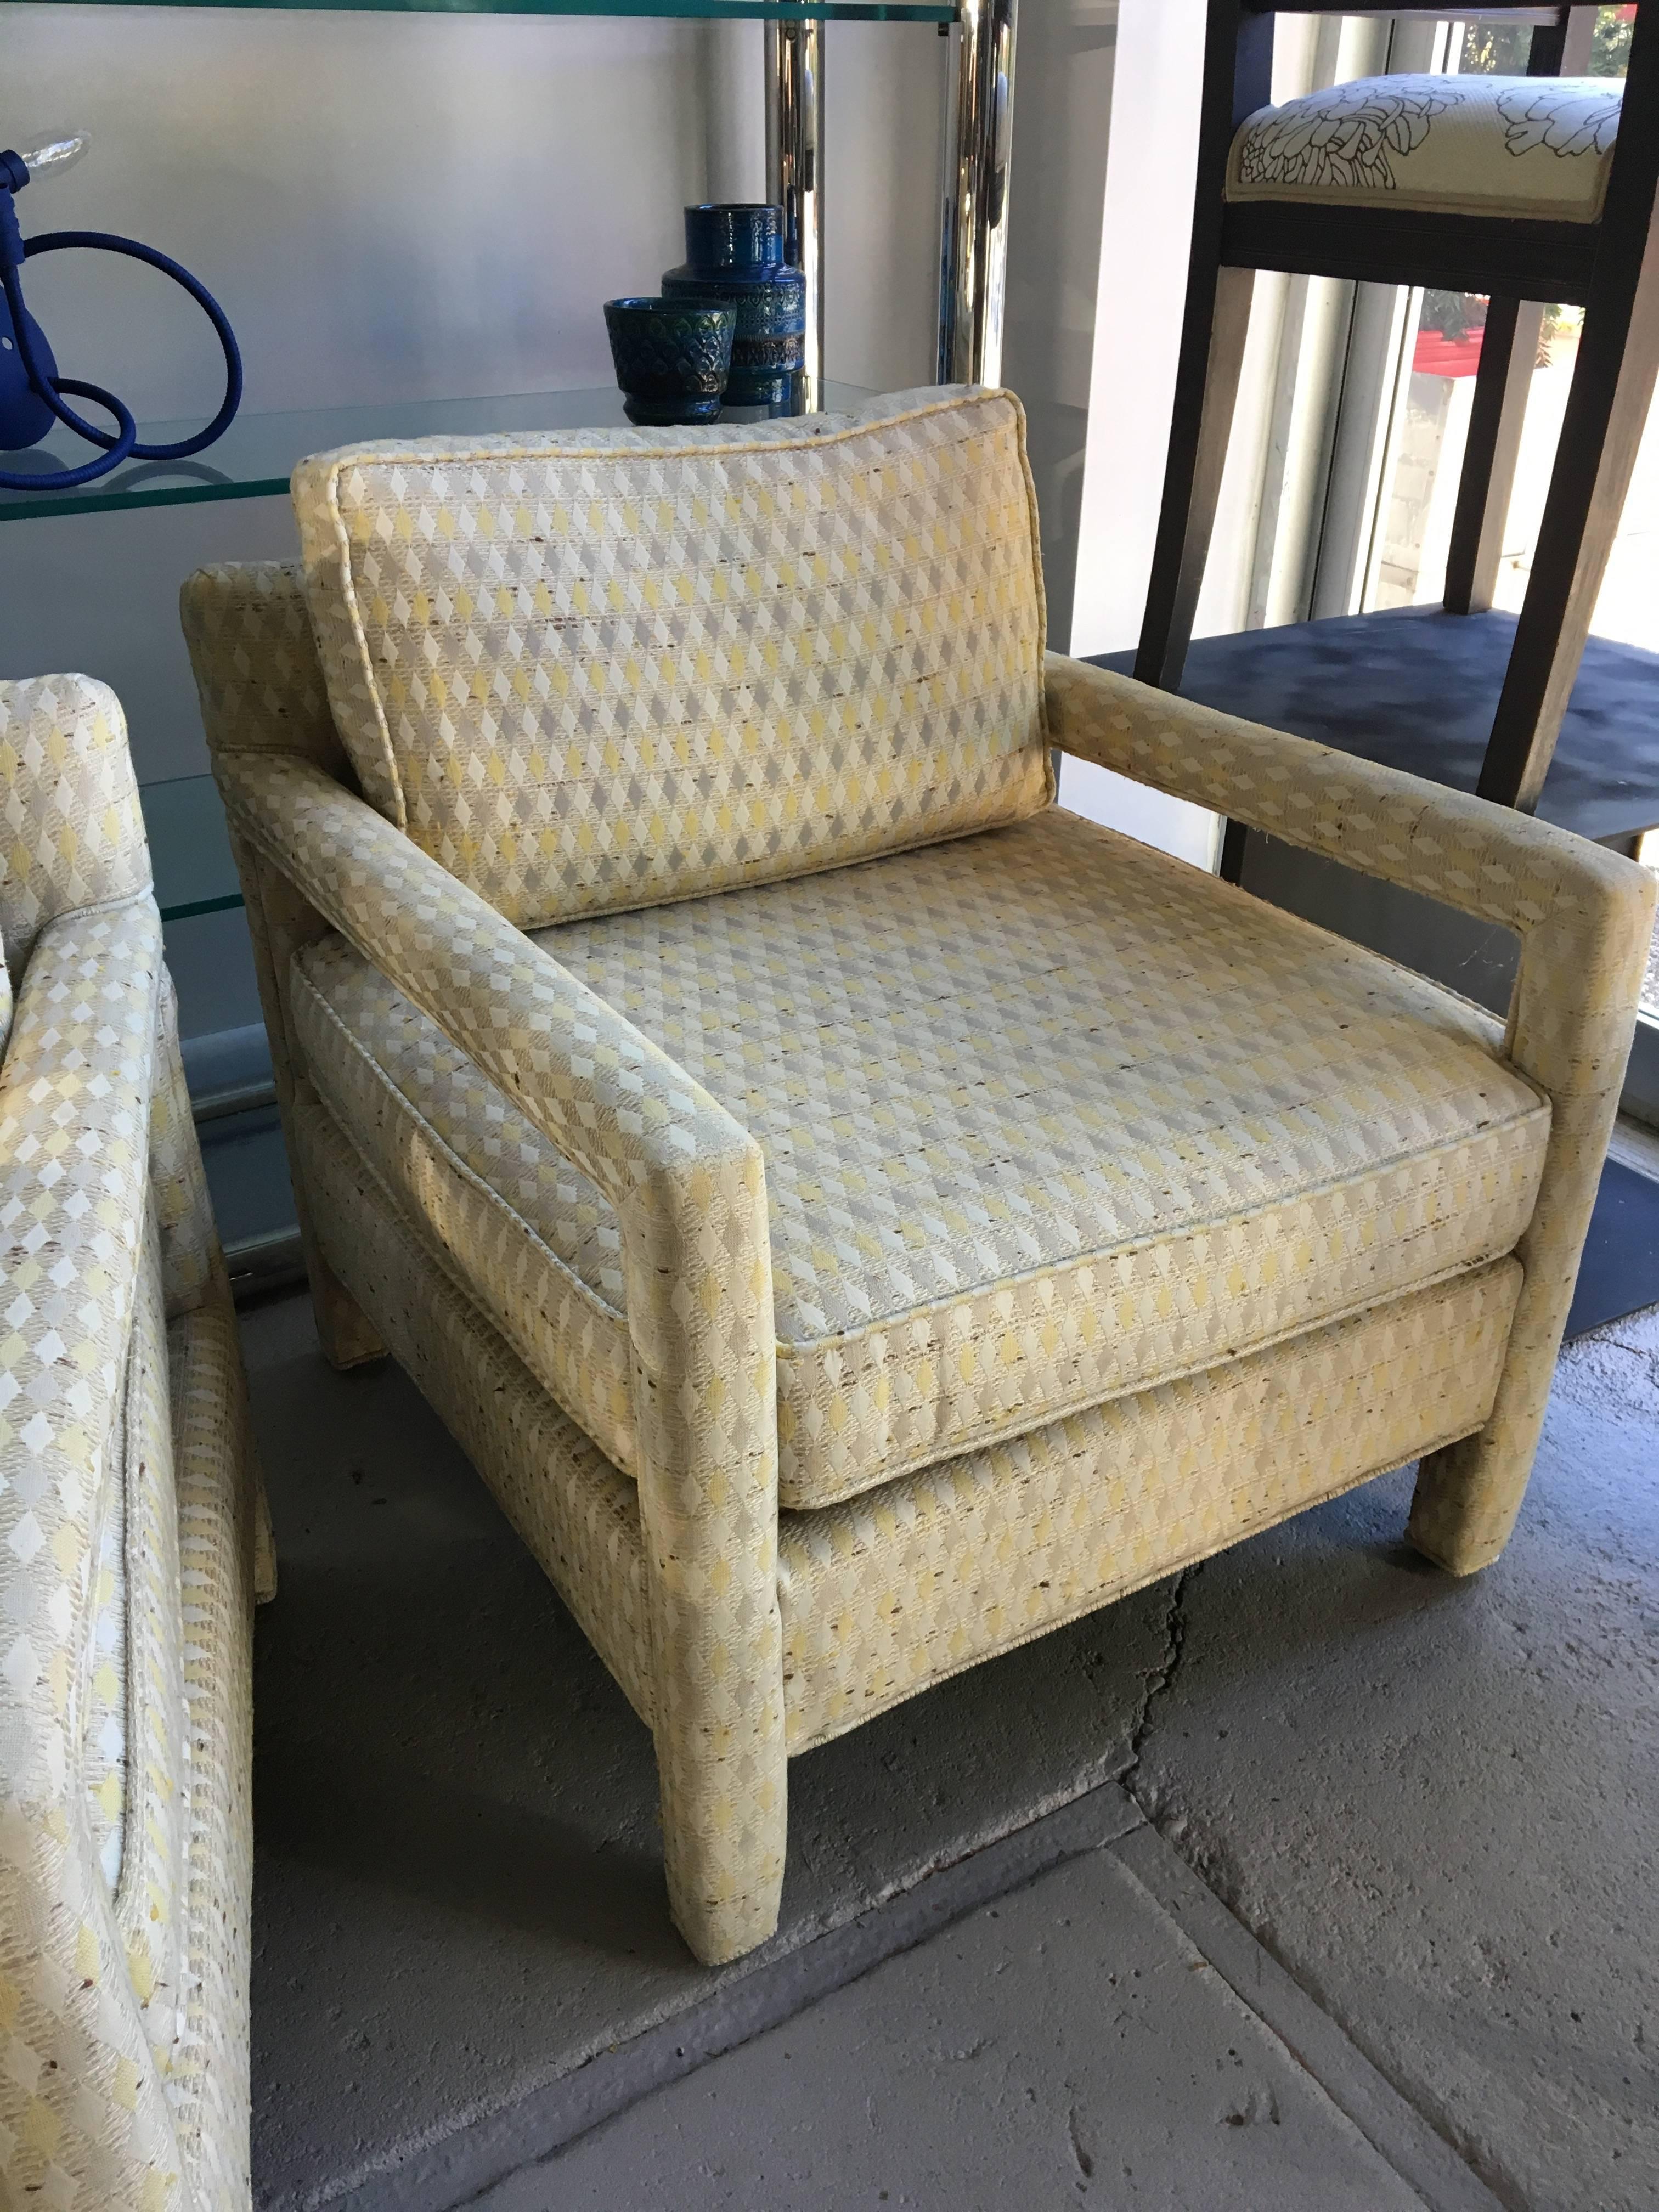 Substantial and charming pair of original condition Parsons style club chairs, possibly by Drexel Heritage. The chairs are in the original harlequin fabric which is in good condition, but some fading.
Avantgarden Ltd. cultivates unexpected and